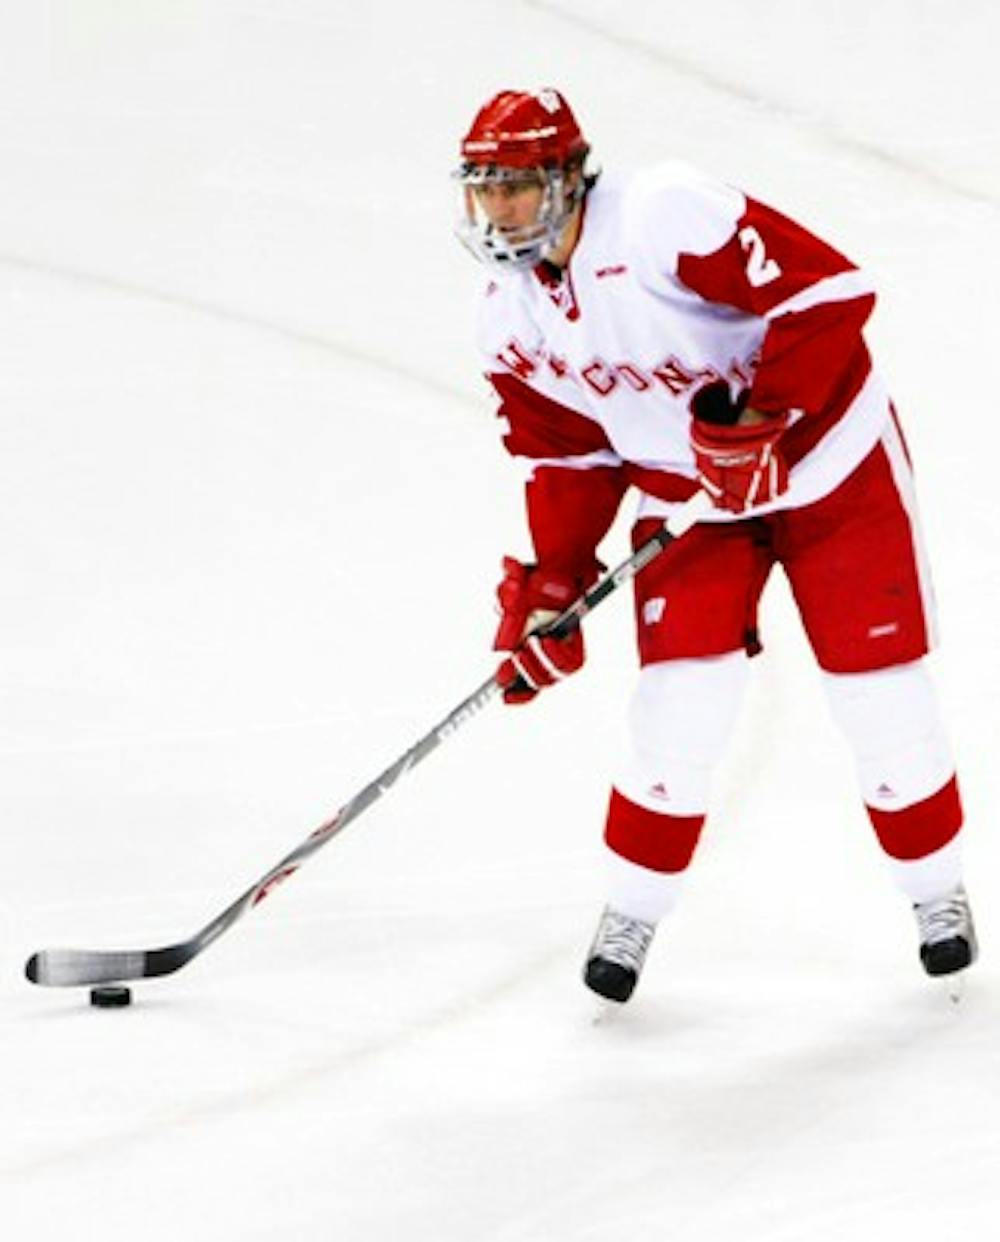 Badgers and Bulldogs split series, remain tied for fouth place